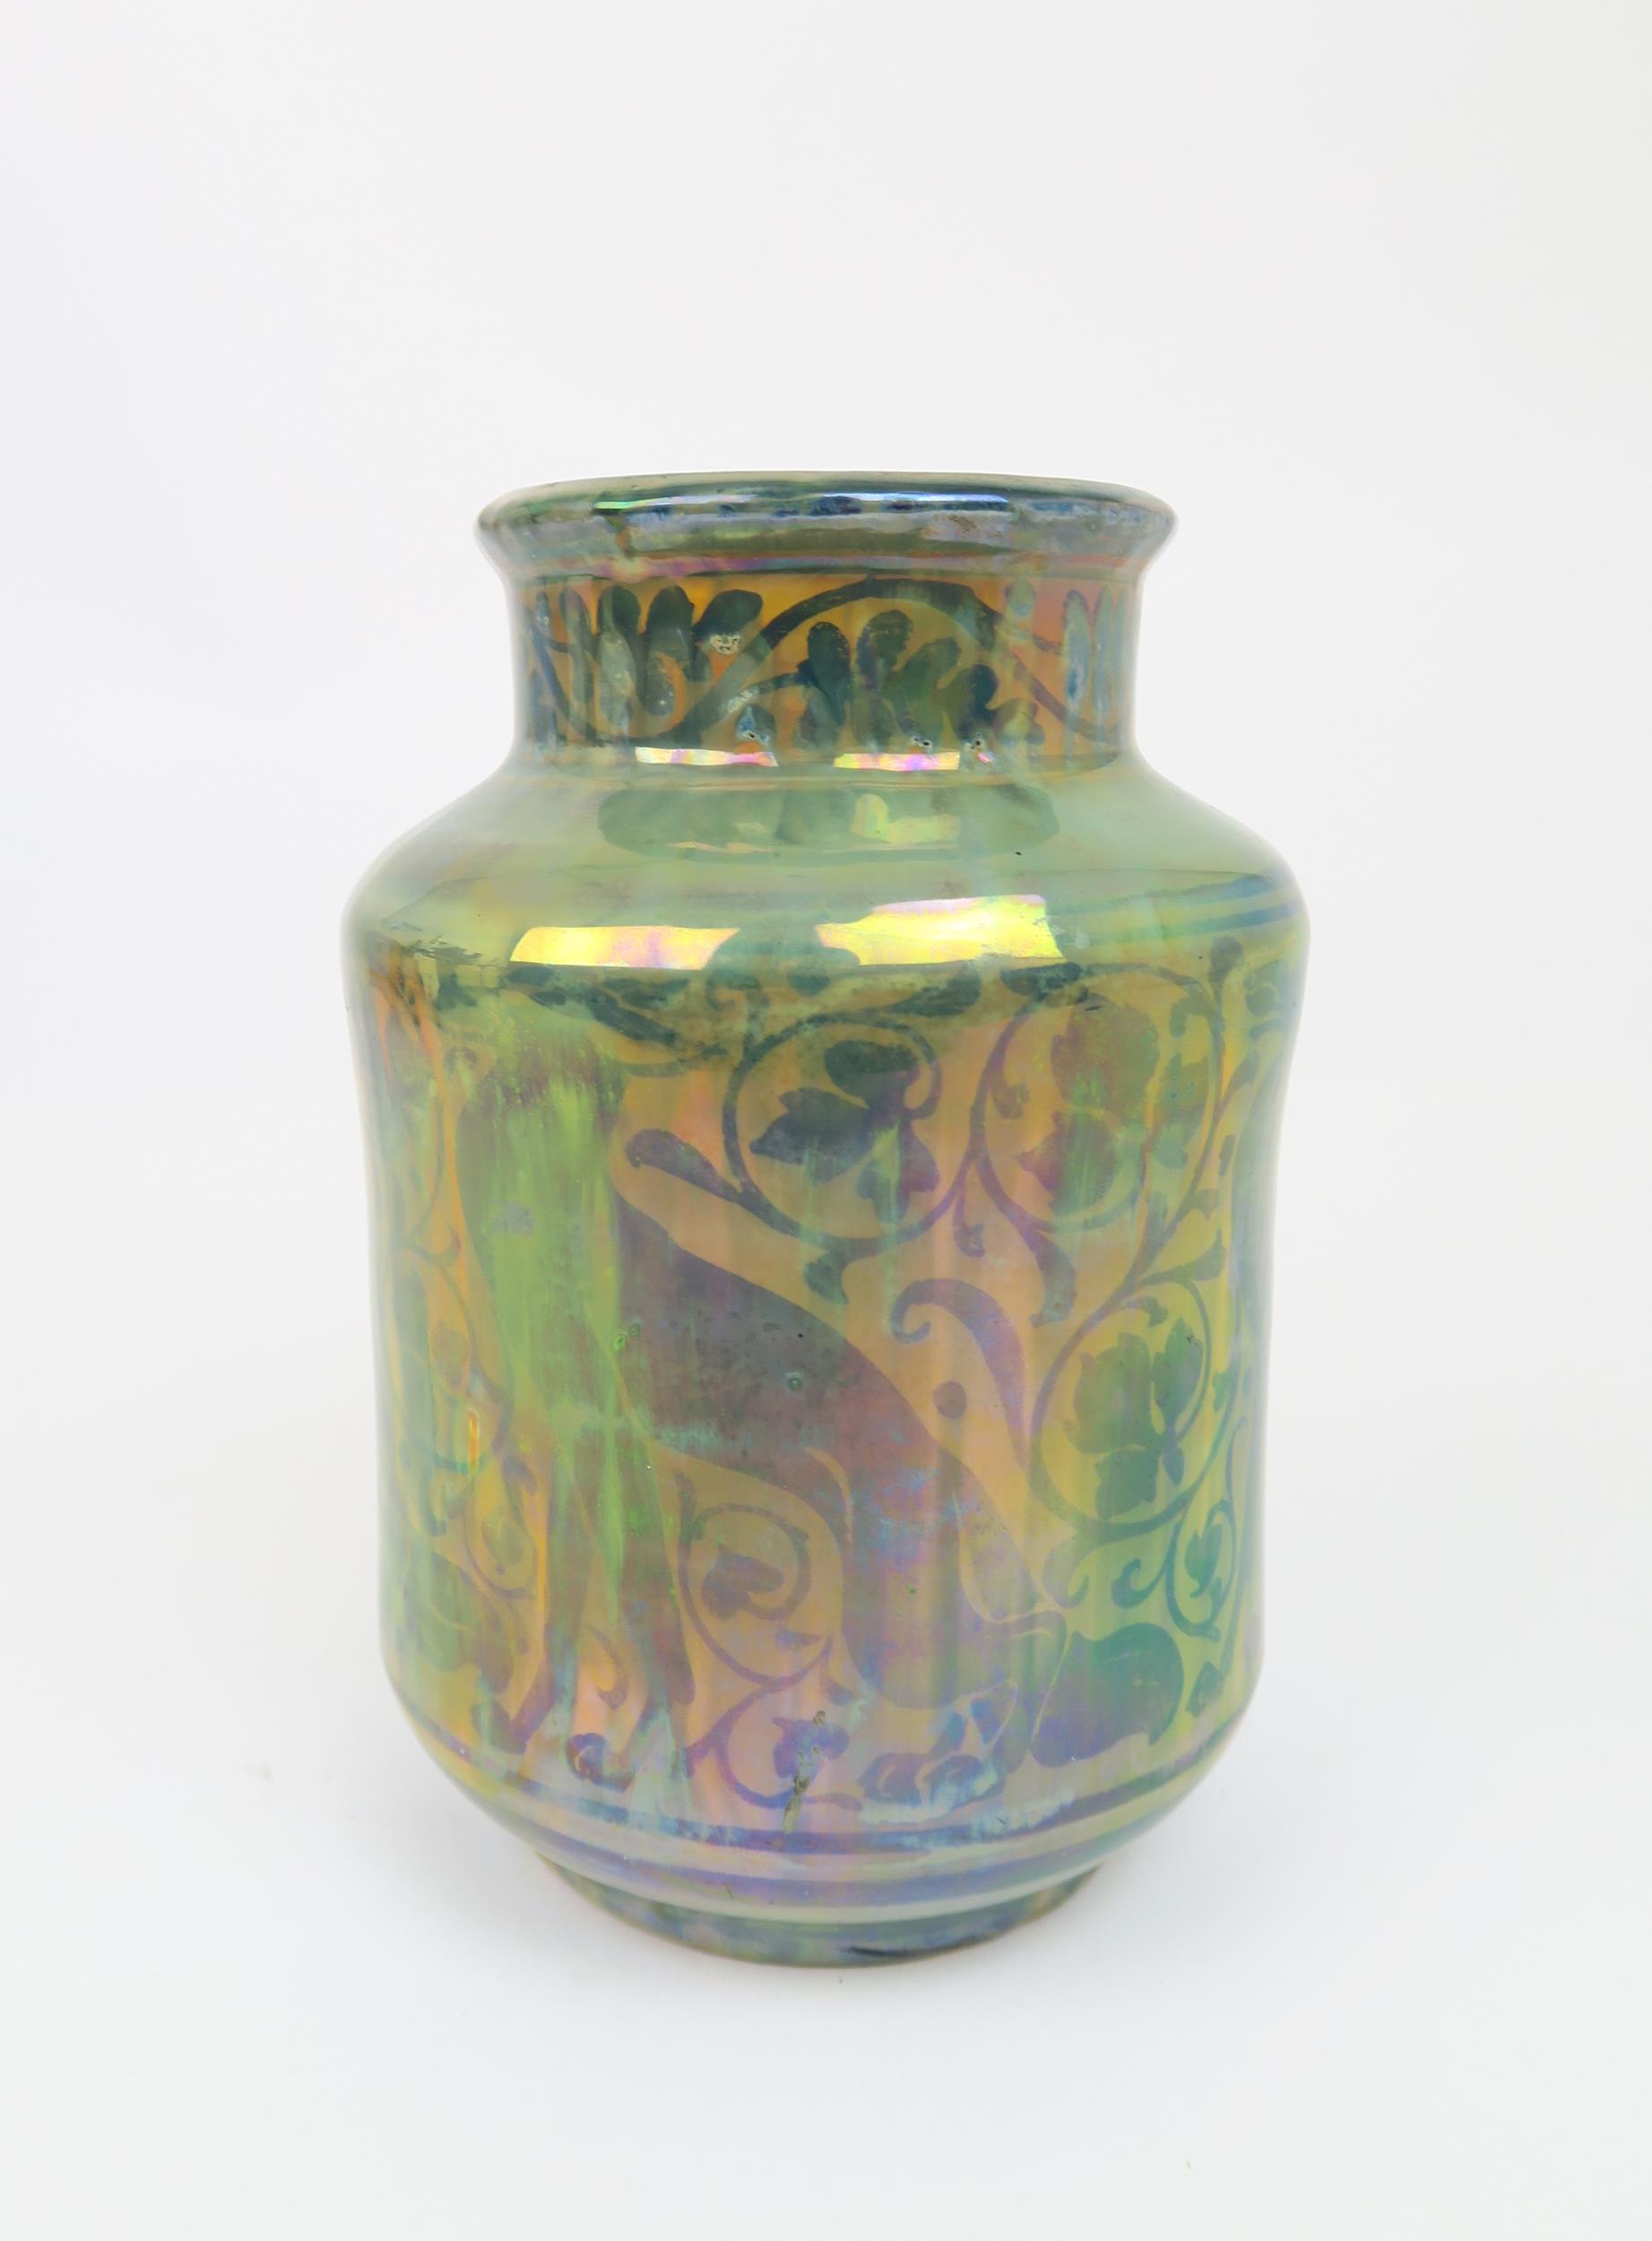 A ROYAL LANCASTRIAN LUSTRE VASE designed by Richard Joyce, the body painted with stylised foxes - Image 4 of 9